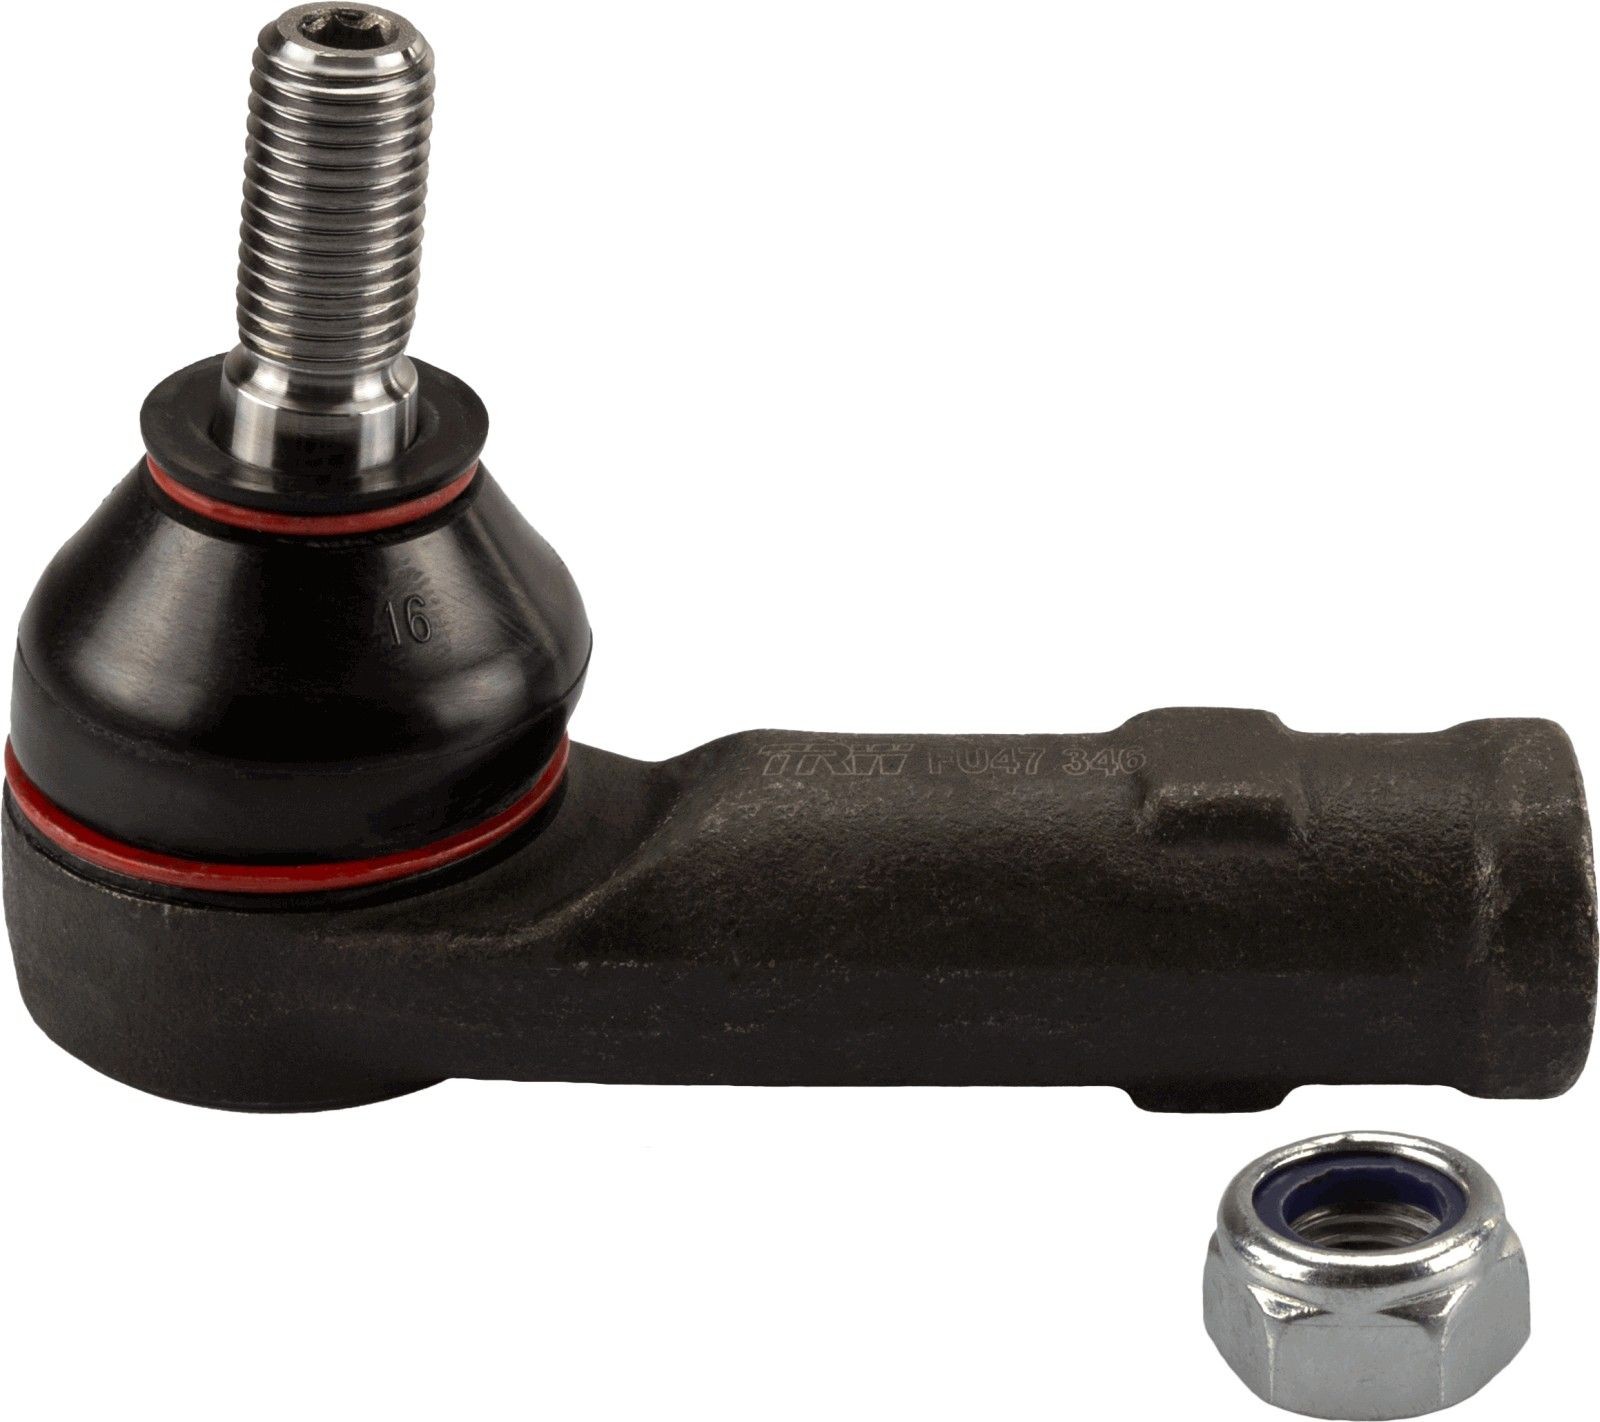 TRW Cone Size 14 mm, with accessories Cone Size: 14mm, Thread Type: with right-hand thread, Thread Size: M12x1,5 Tie rod end JTE346 buy